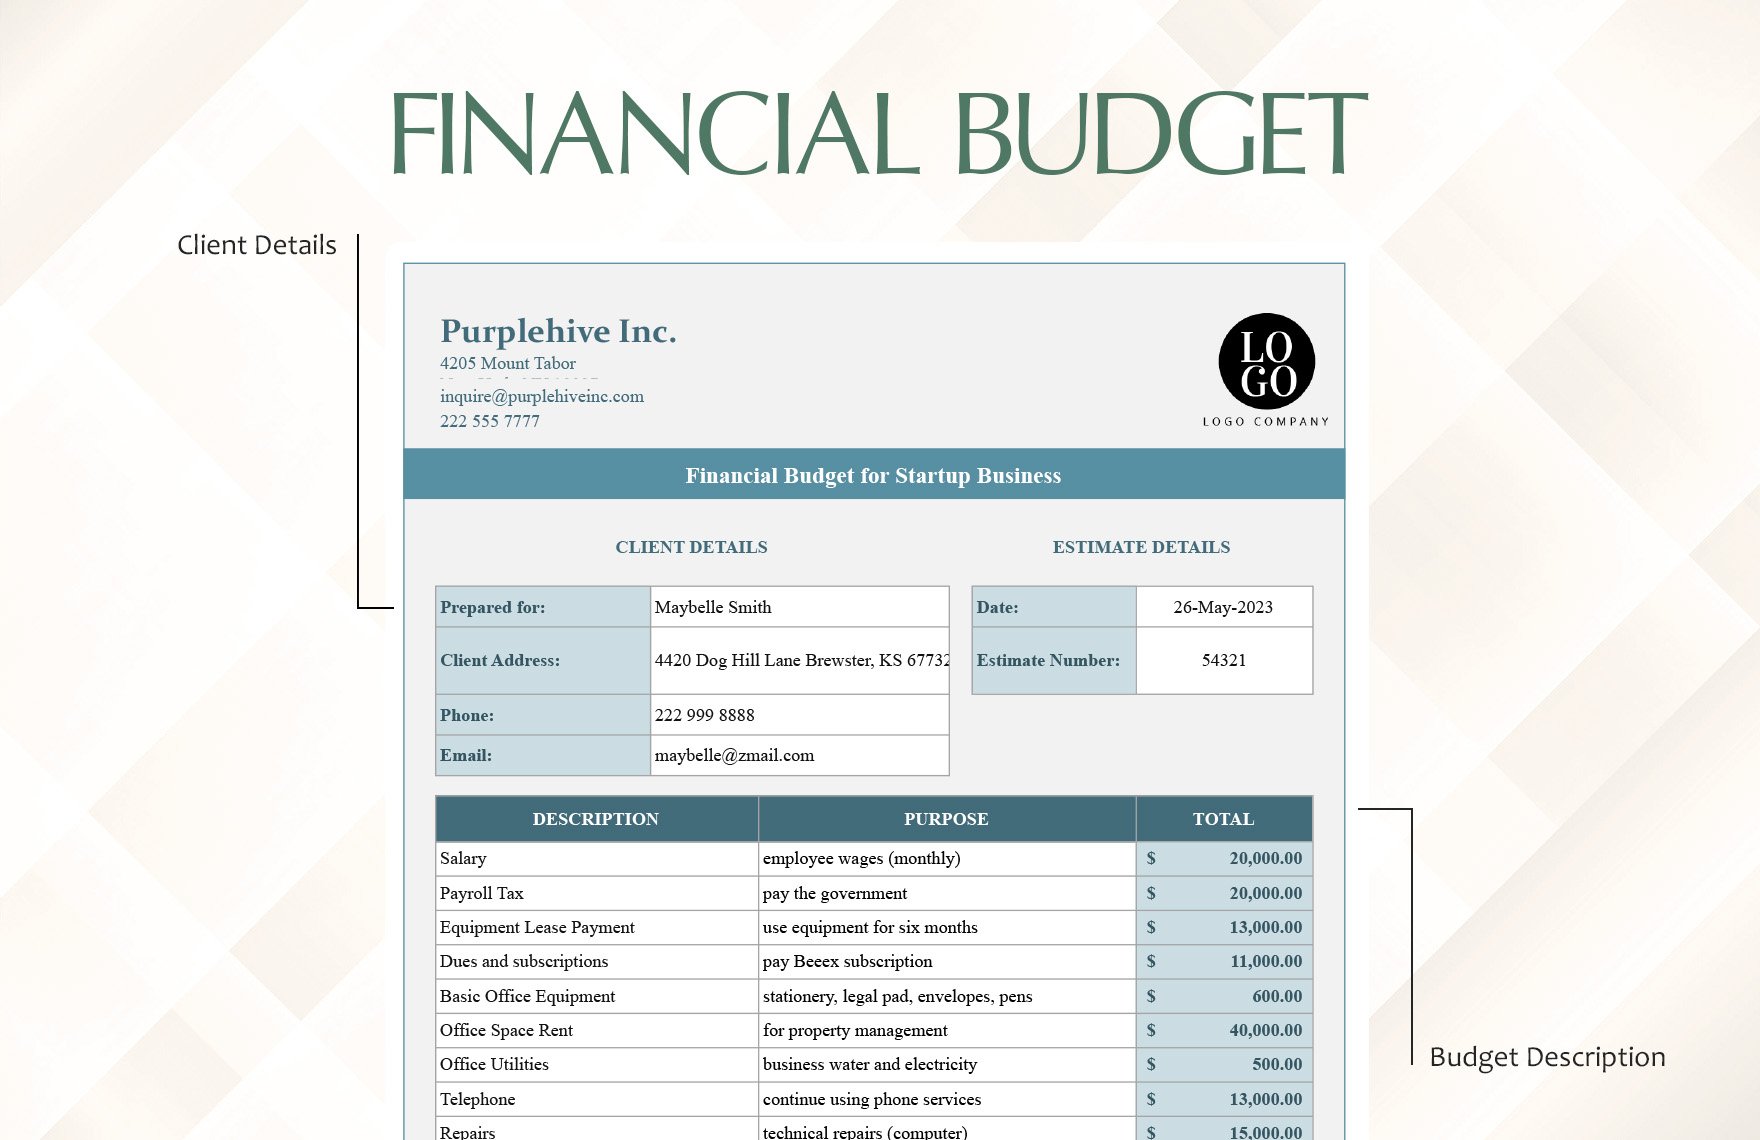 Financial Budget for Startup Business